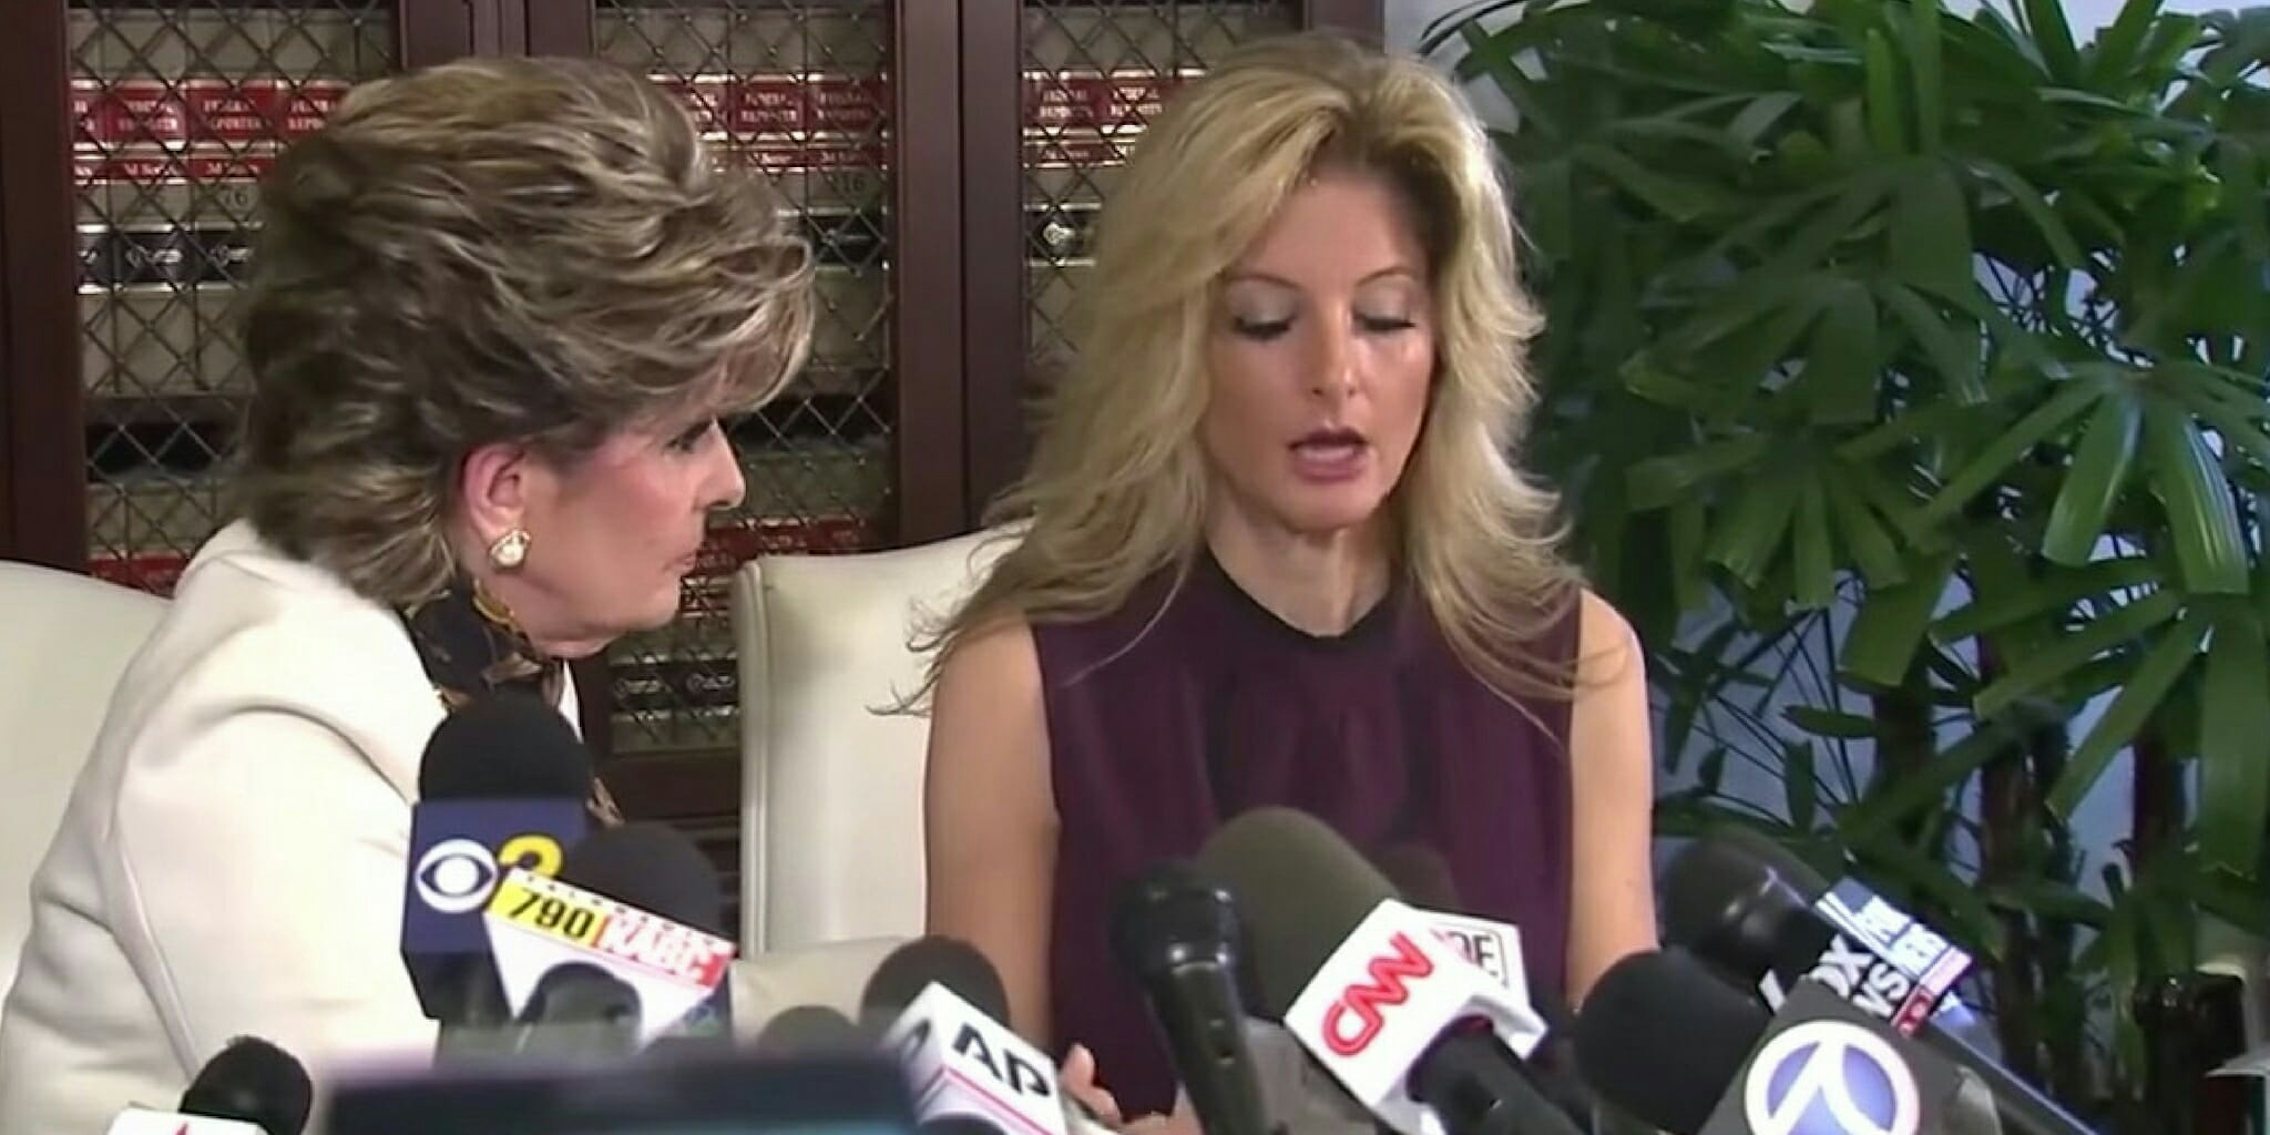 Summer Zervos and her lawyer Glorida Allred when Zervos came forward with accounts of sexual assault against President Donald Trump.